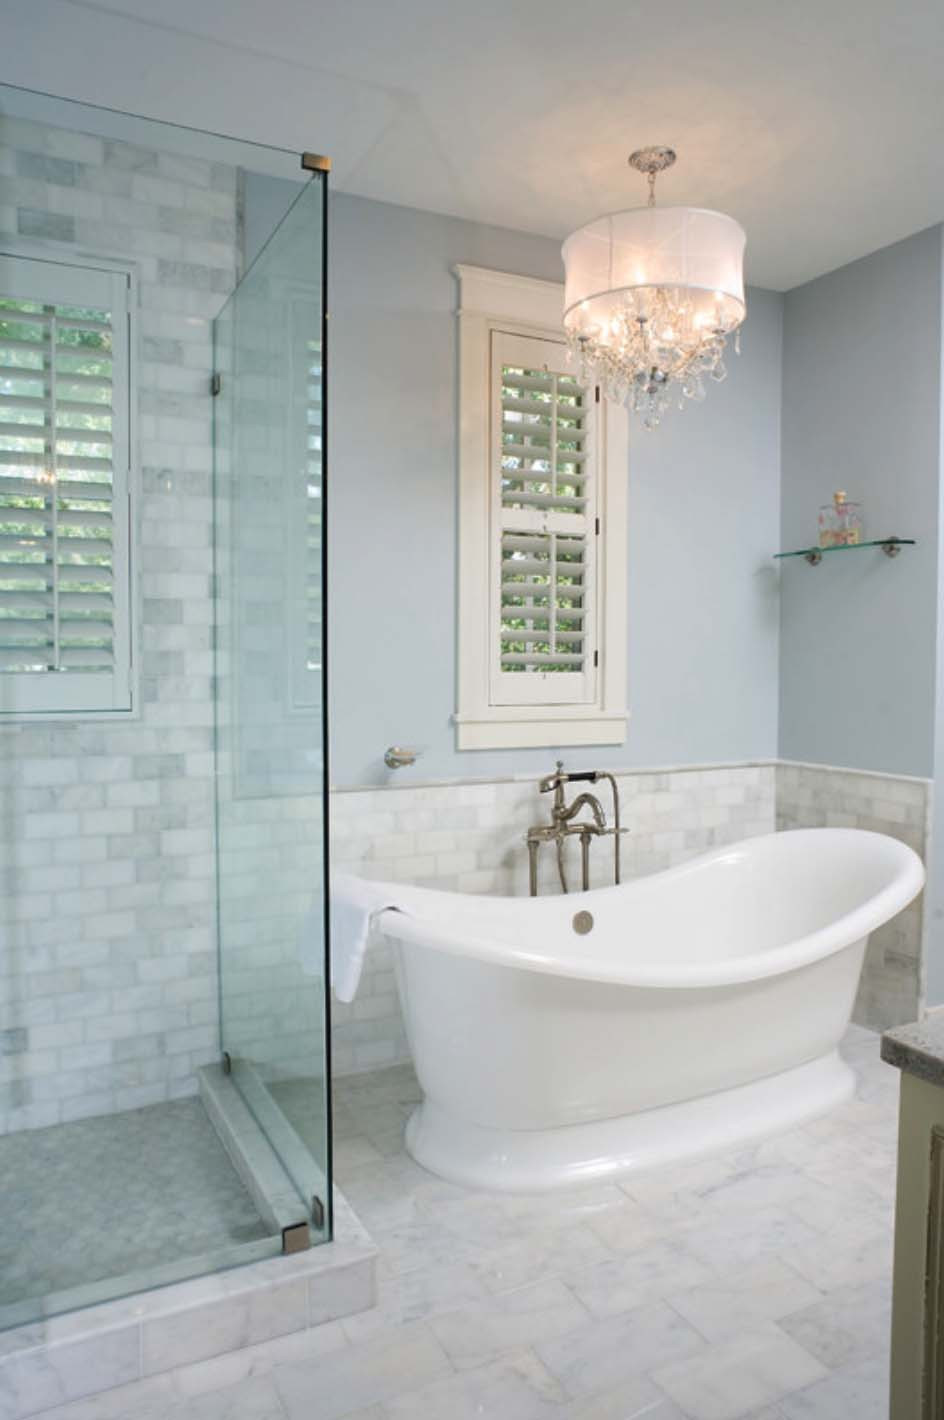 Freestanding Tub In Small Bathroom
 38 Amazing freestanding tubs for a bathroom spa sanctuary